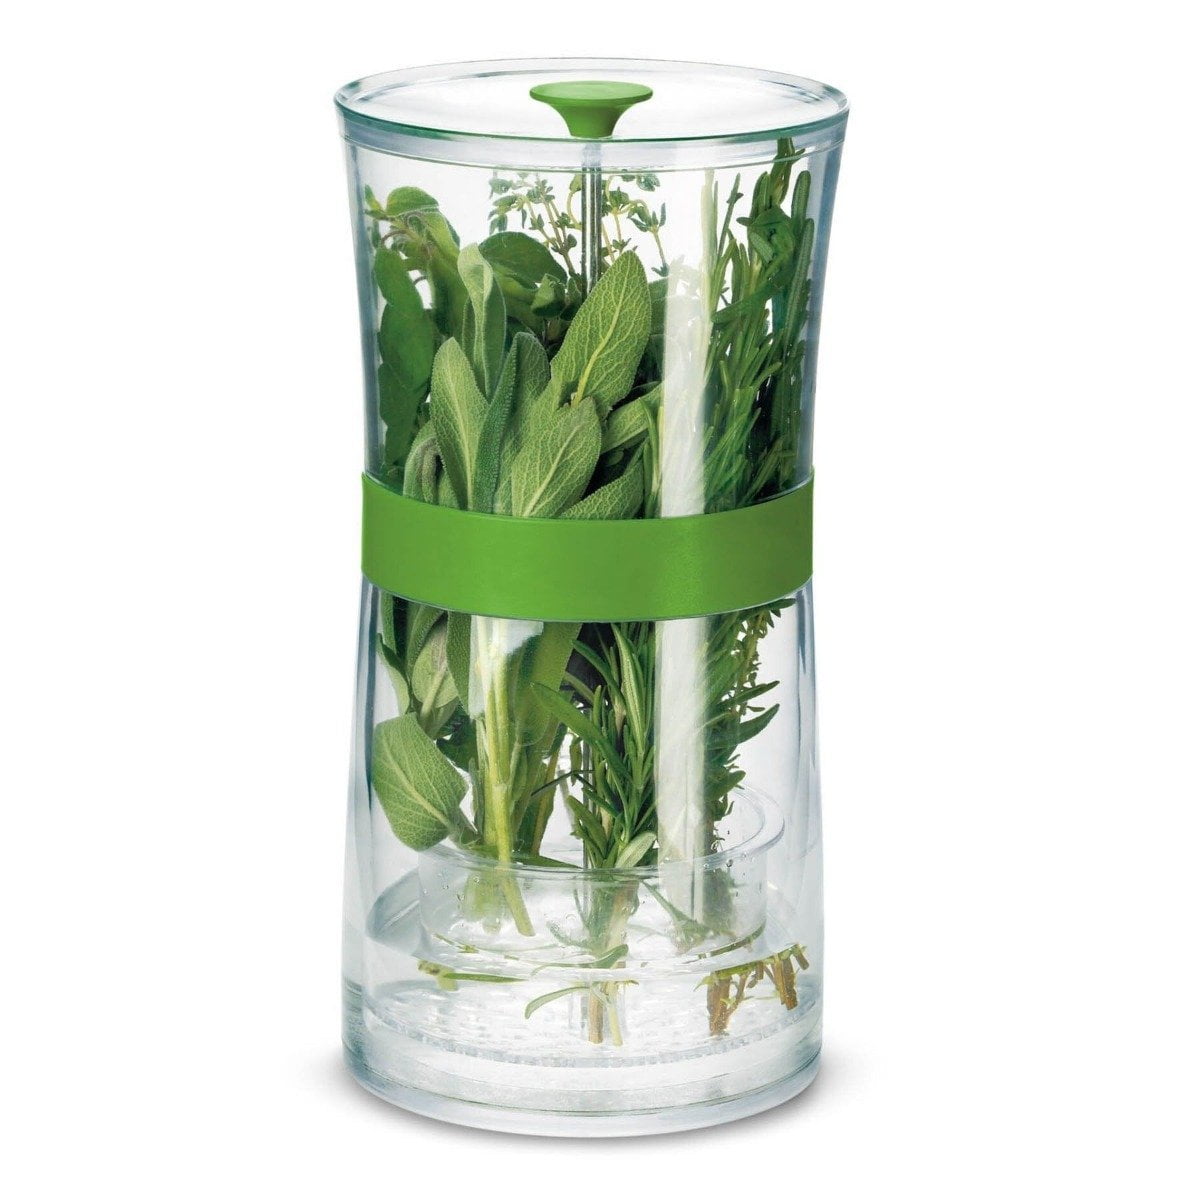 Cole & Mason Premium 16 Jar Filled Herb & Spice Carousel, Stainless Steel & Glass, 25.5cm